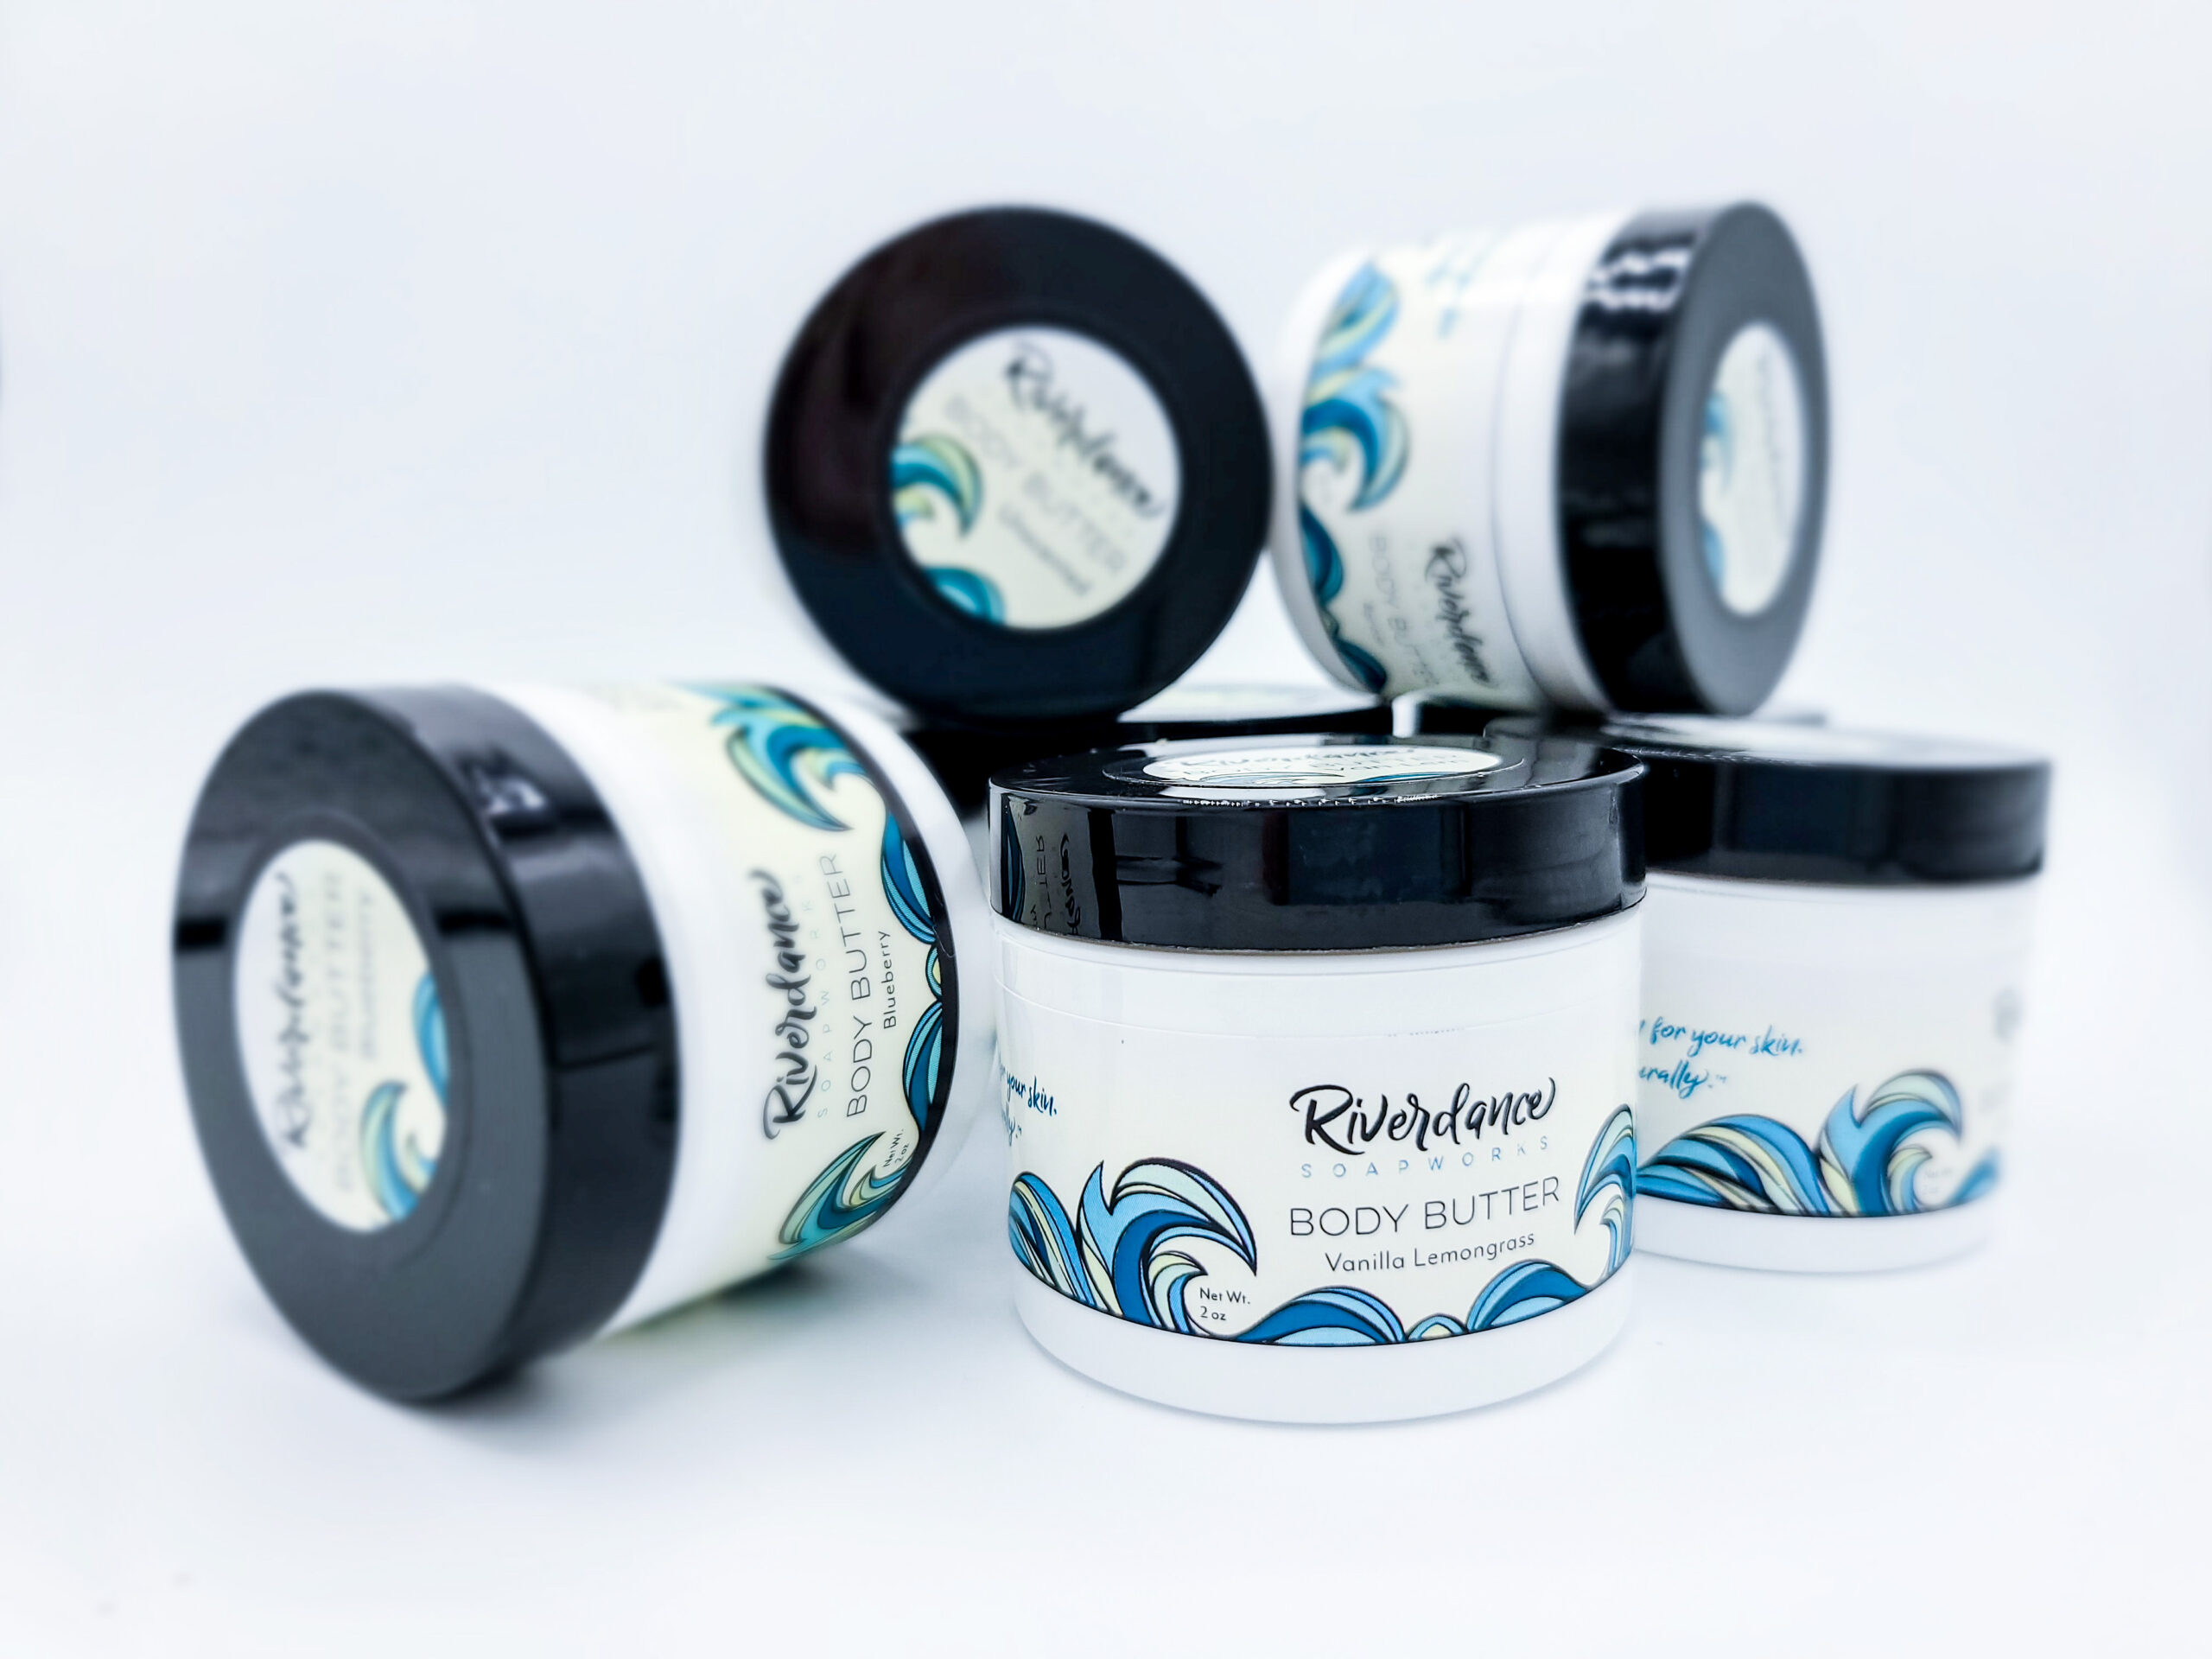 Product image for Bulk Body Butter listing